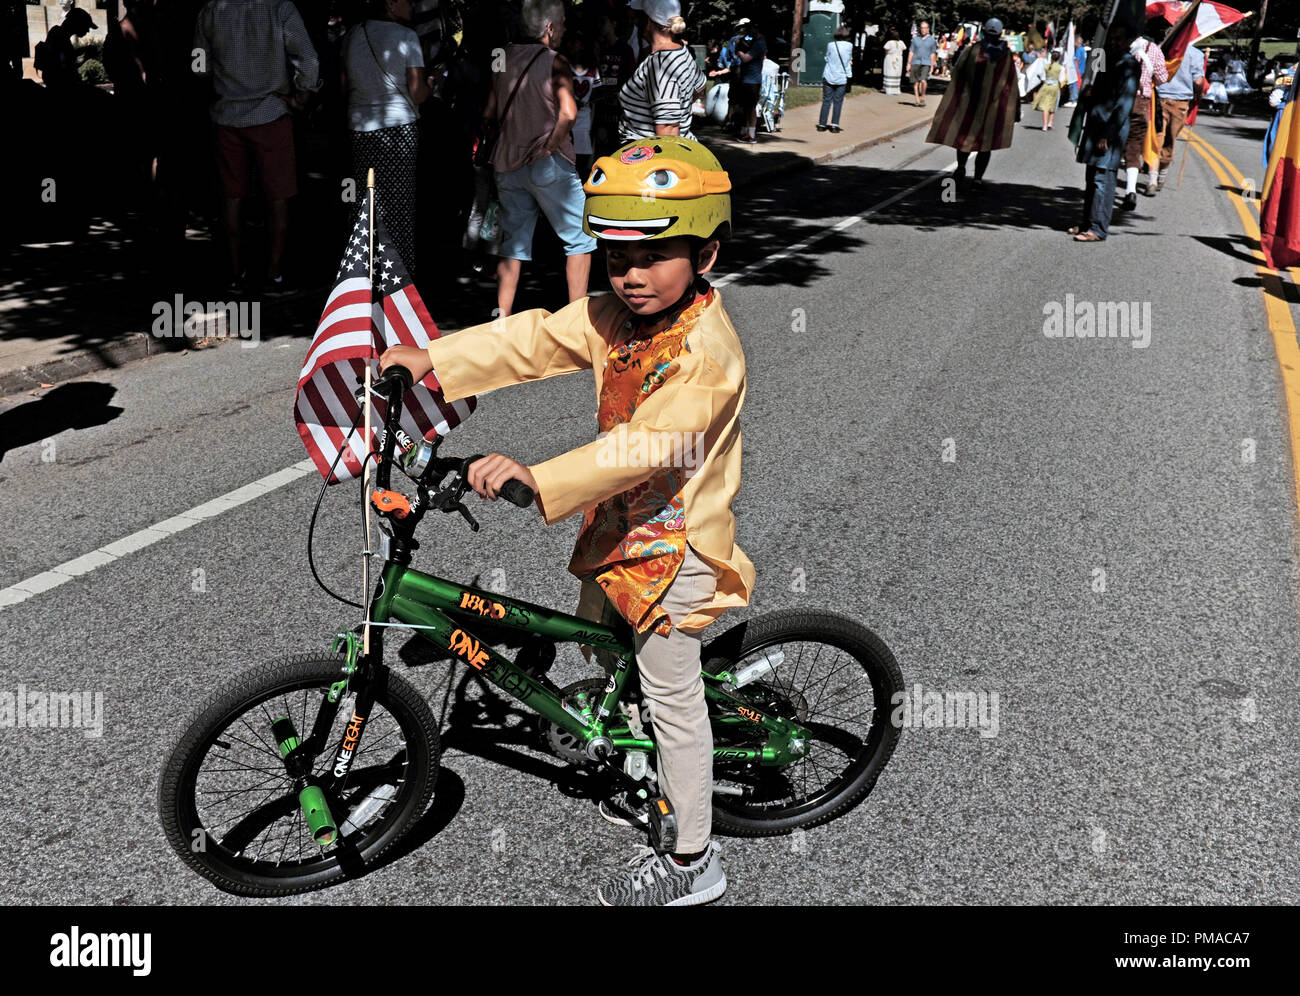 Vietnamese-American boy on his two-wheel bicycle with an American flag on its handlebars takes part in the 73rd One World Day celebration in Cleveland Stock Photo